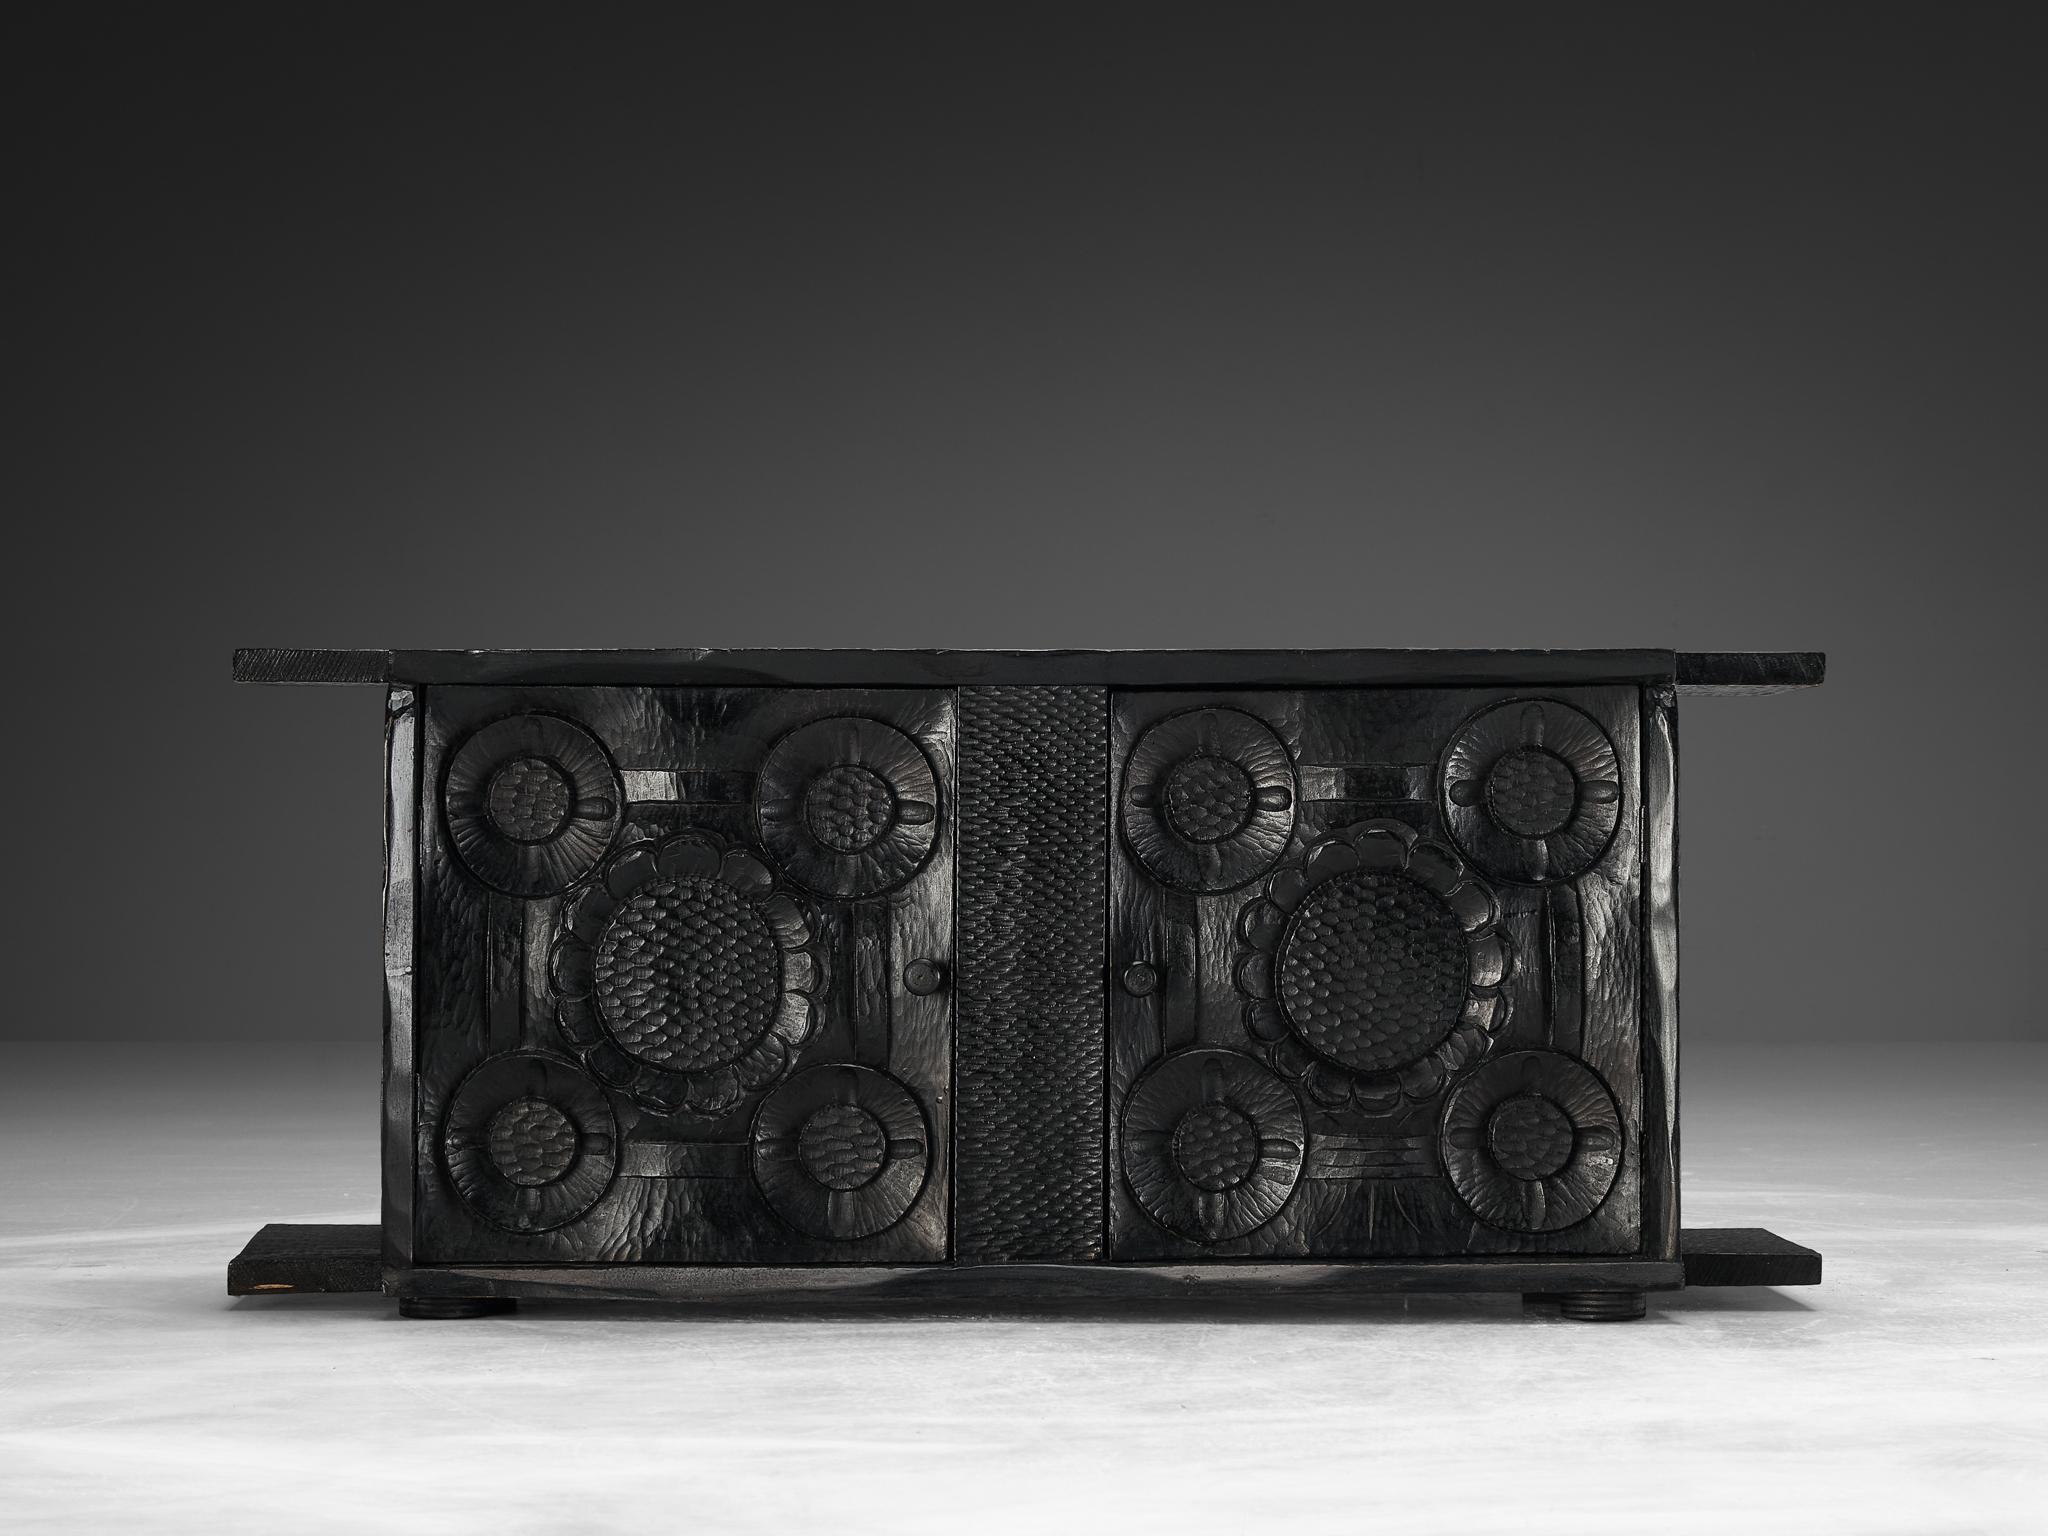 French Sculptural Trunk in Black Lacquered Wood with Decorative Carvings  For Sale